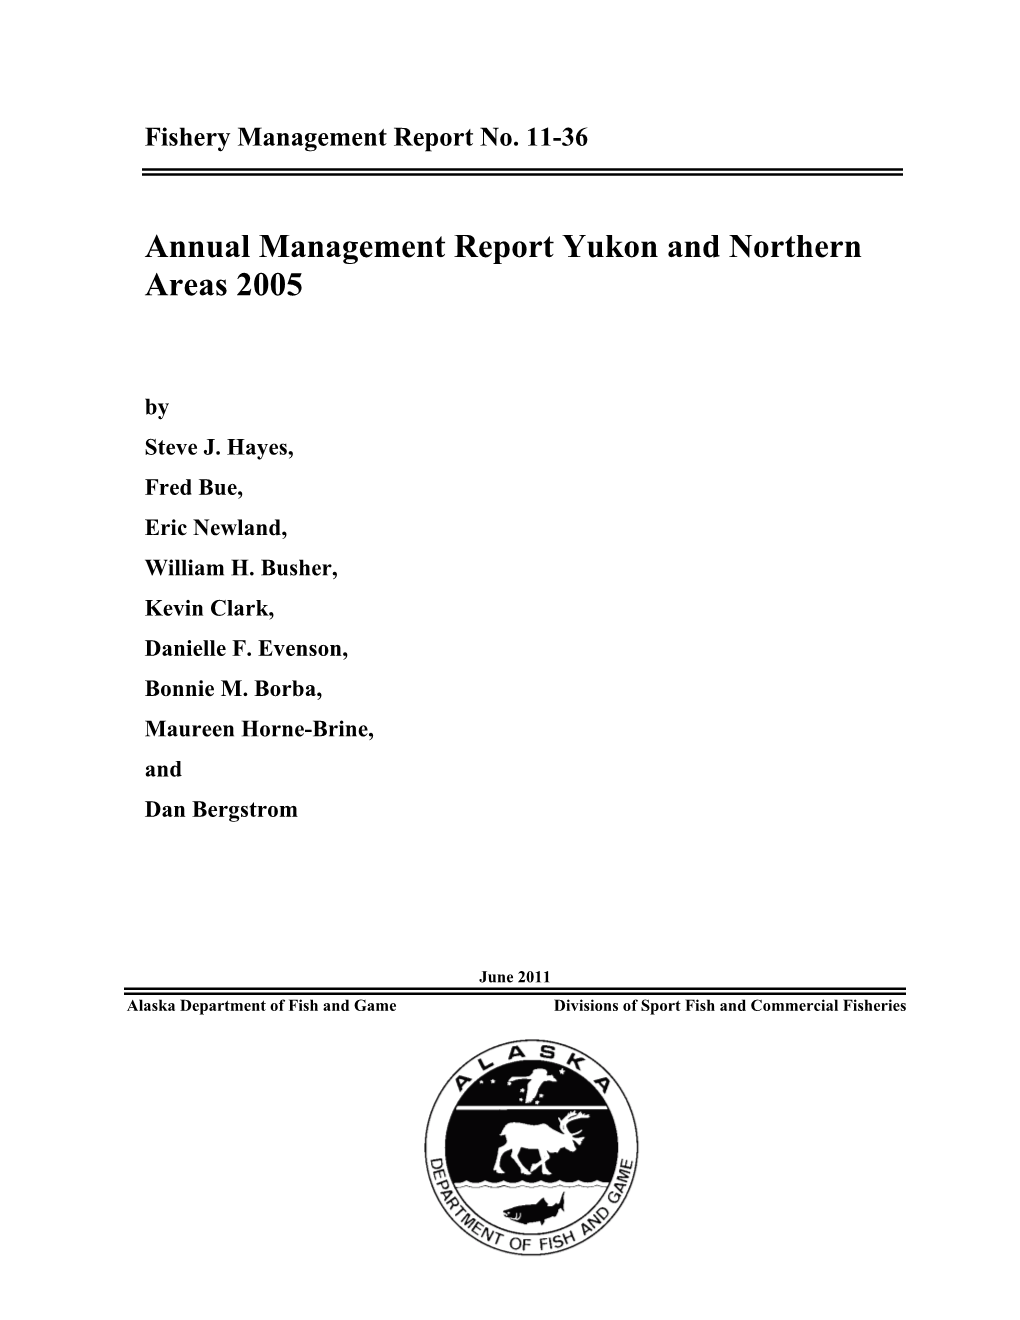 Annual Management Report Yukon and Northern Areas 2005